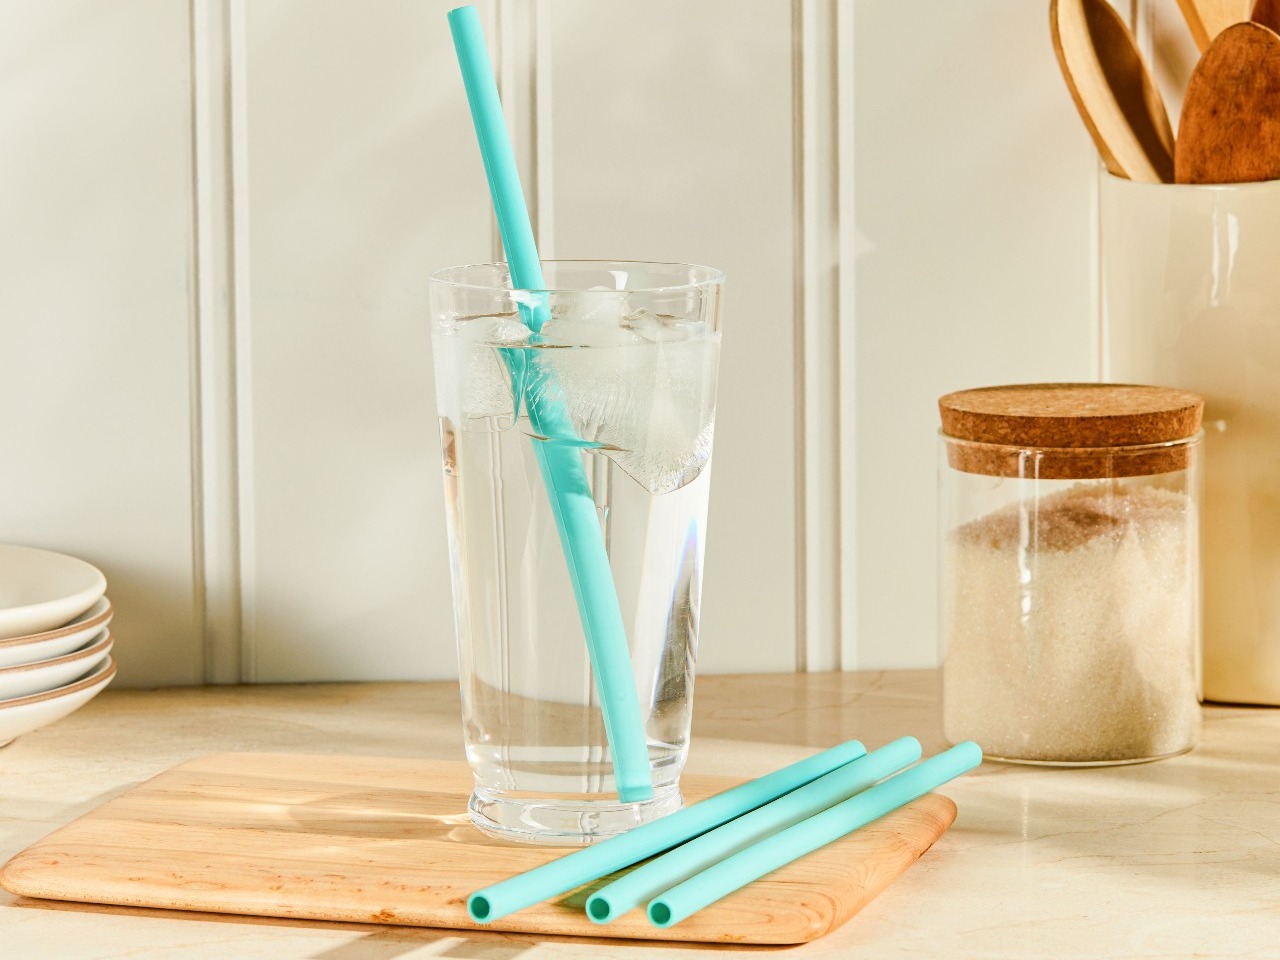 Image of glass with silicone straw in it and other straws on cutting board on counter